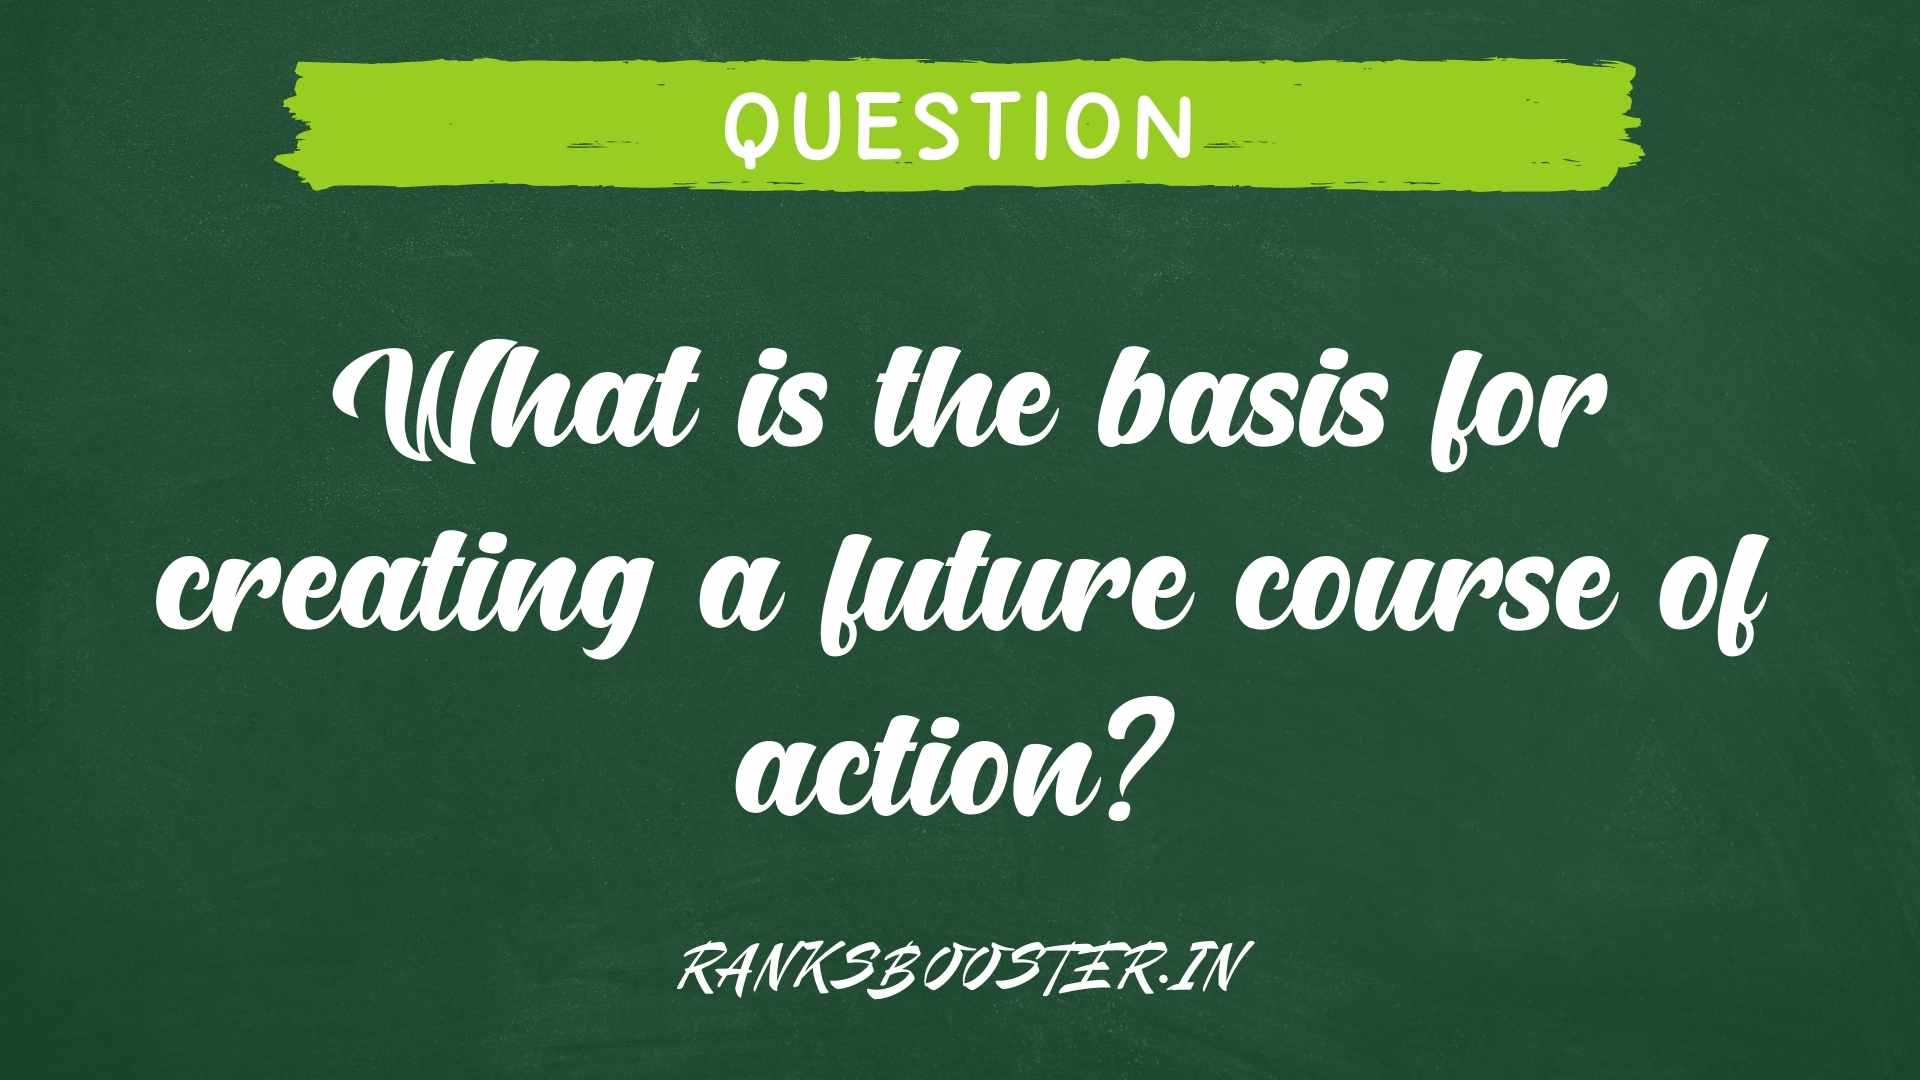 What is the basis for creating a future course of action?